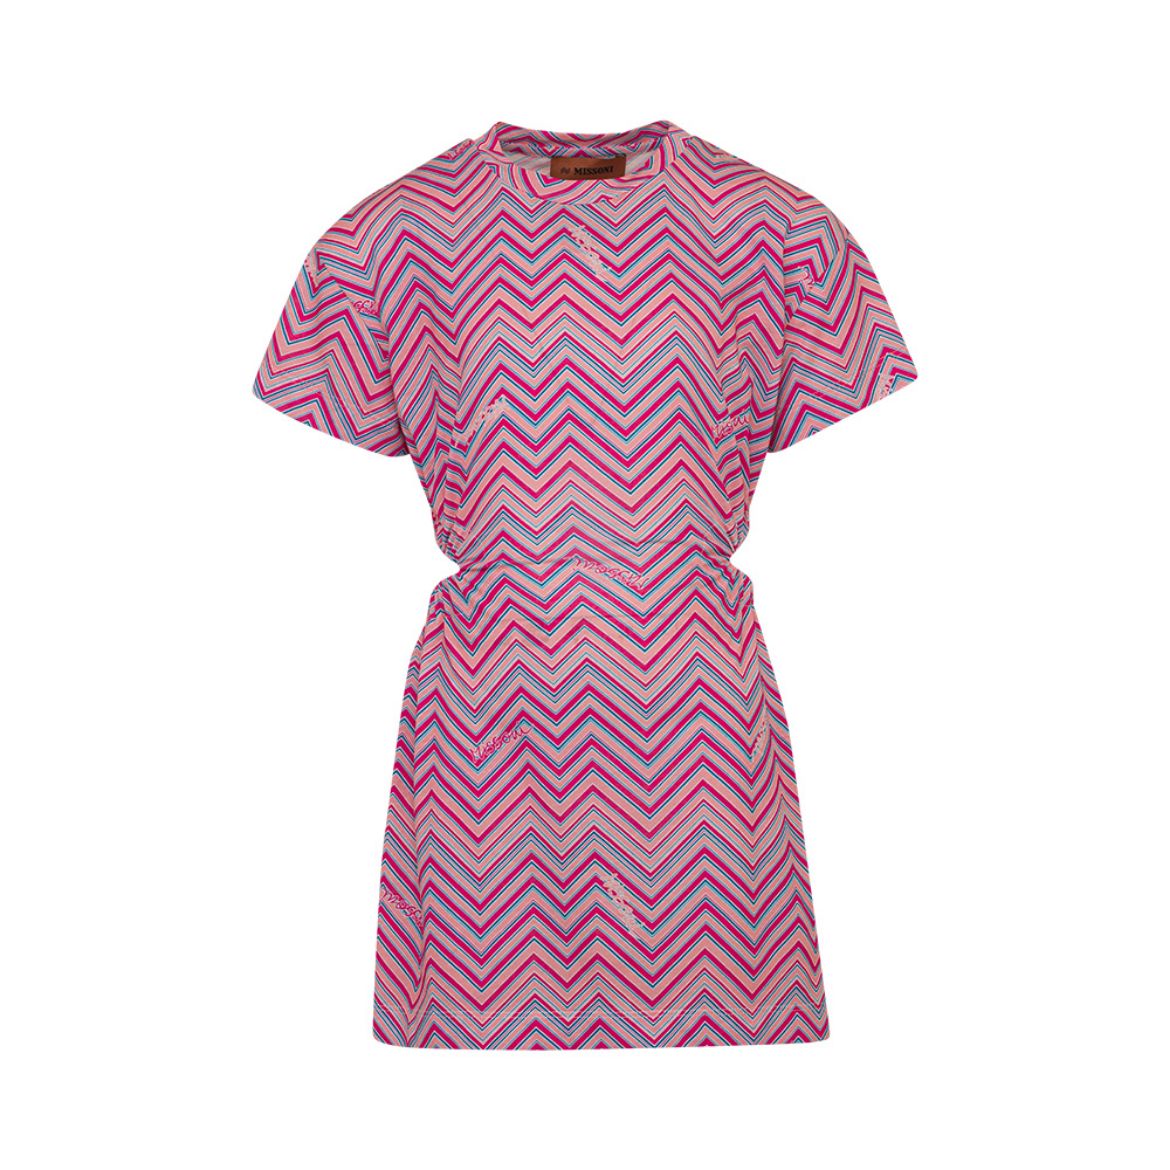 Picture of Missoni Girls Pink Printed Dress